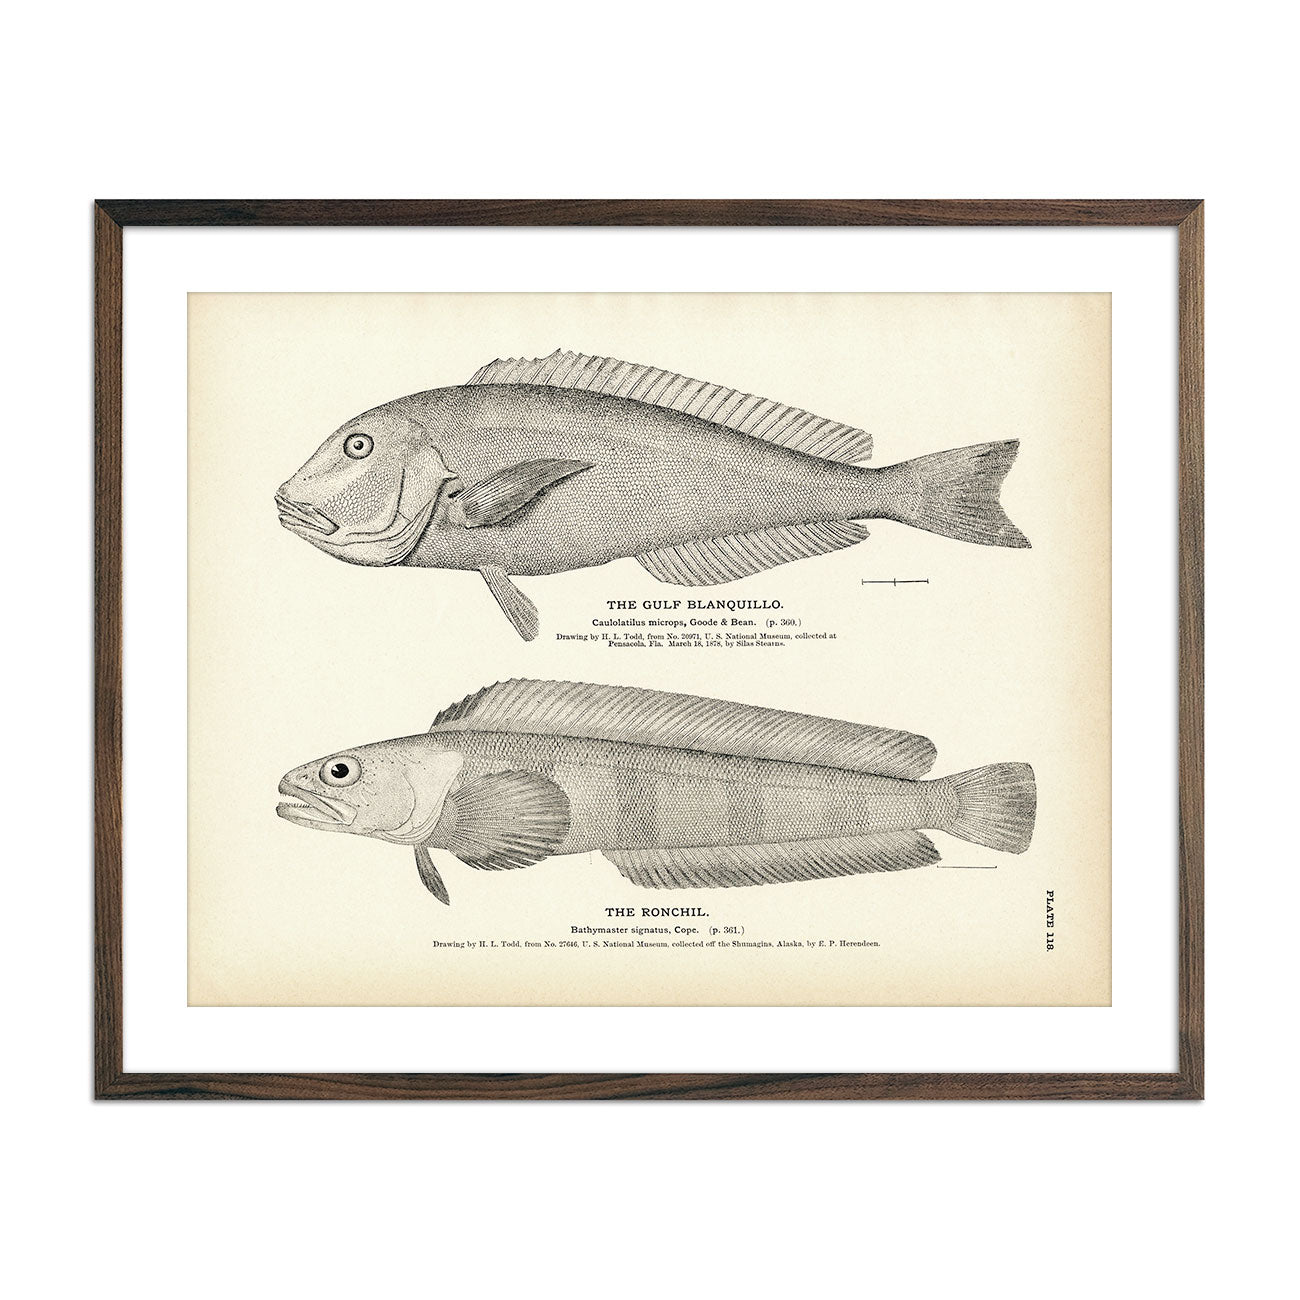 Vintage Gulf Blanquillo and Ronchil fish print